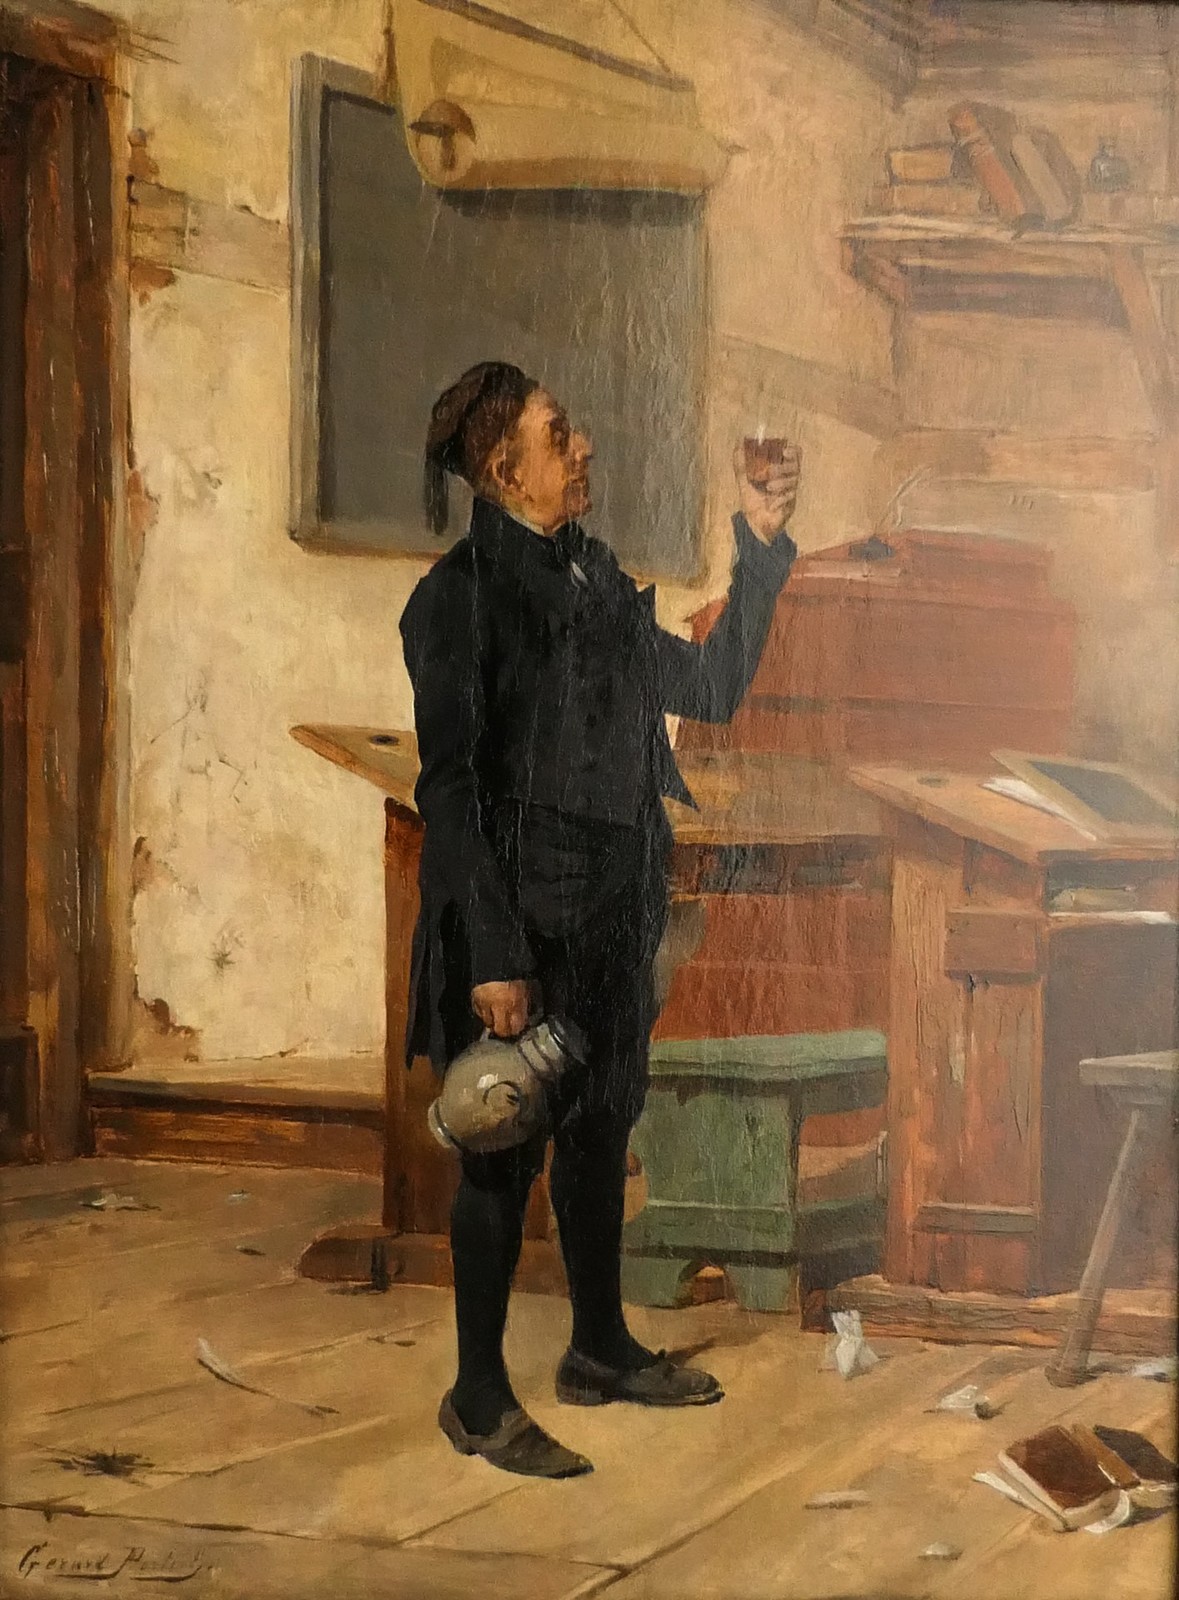 Portielje G., the well-deserved glass, oil on canvas, dated 10 June 1889 and signed on the back,